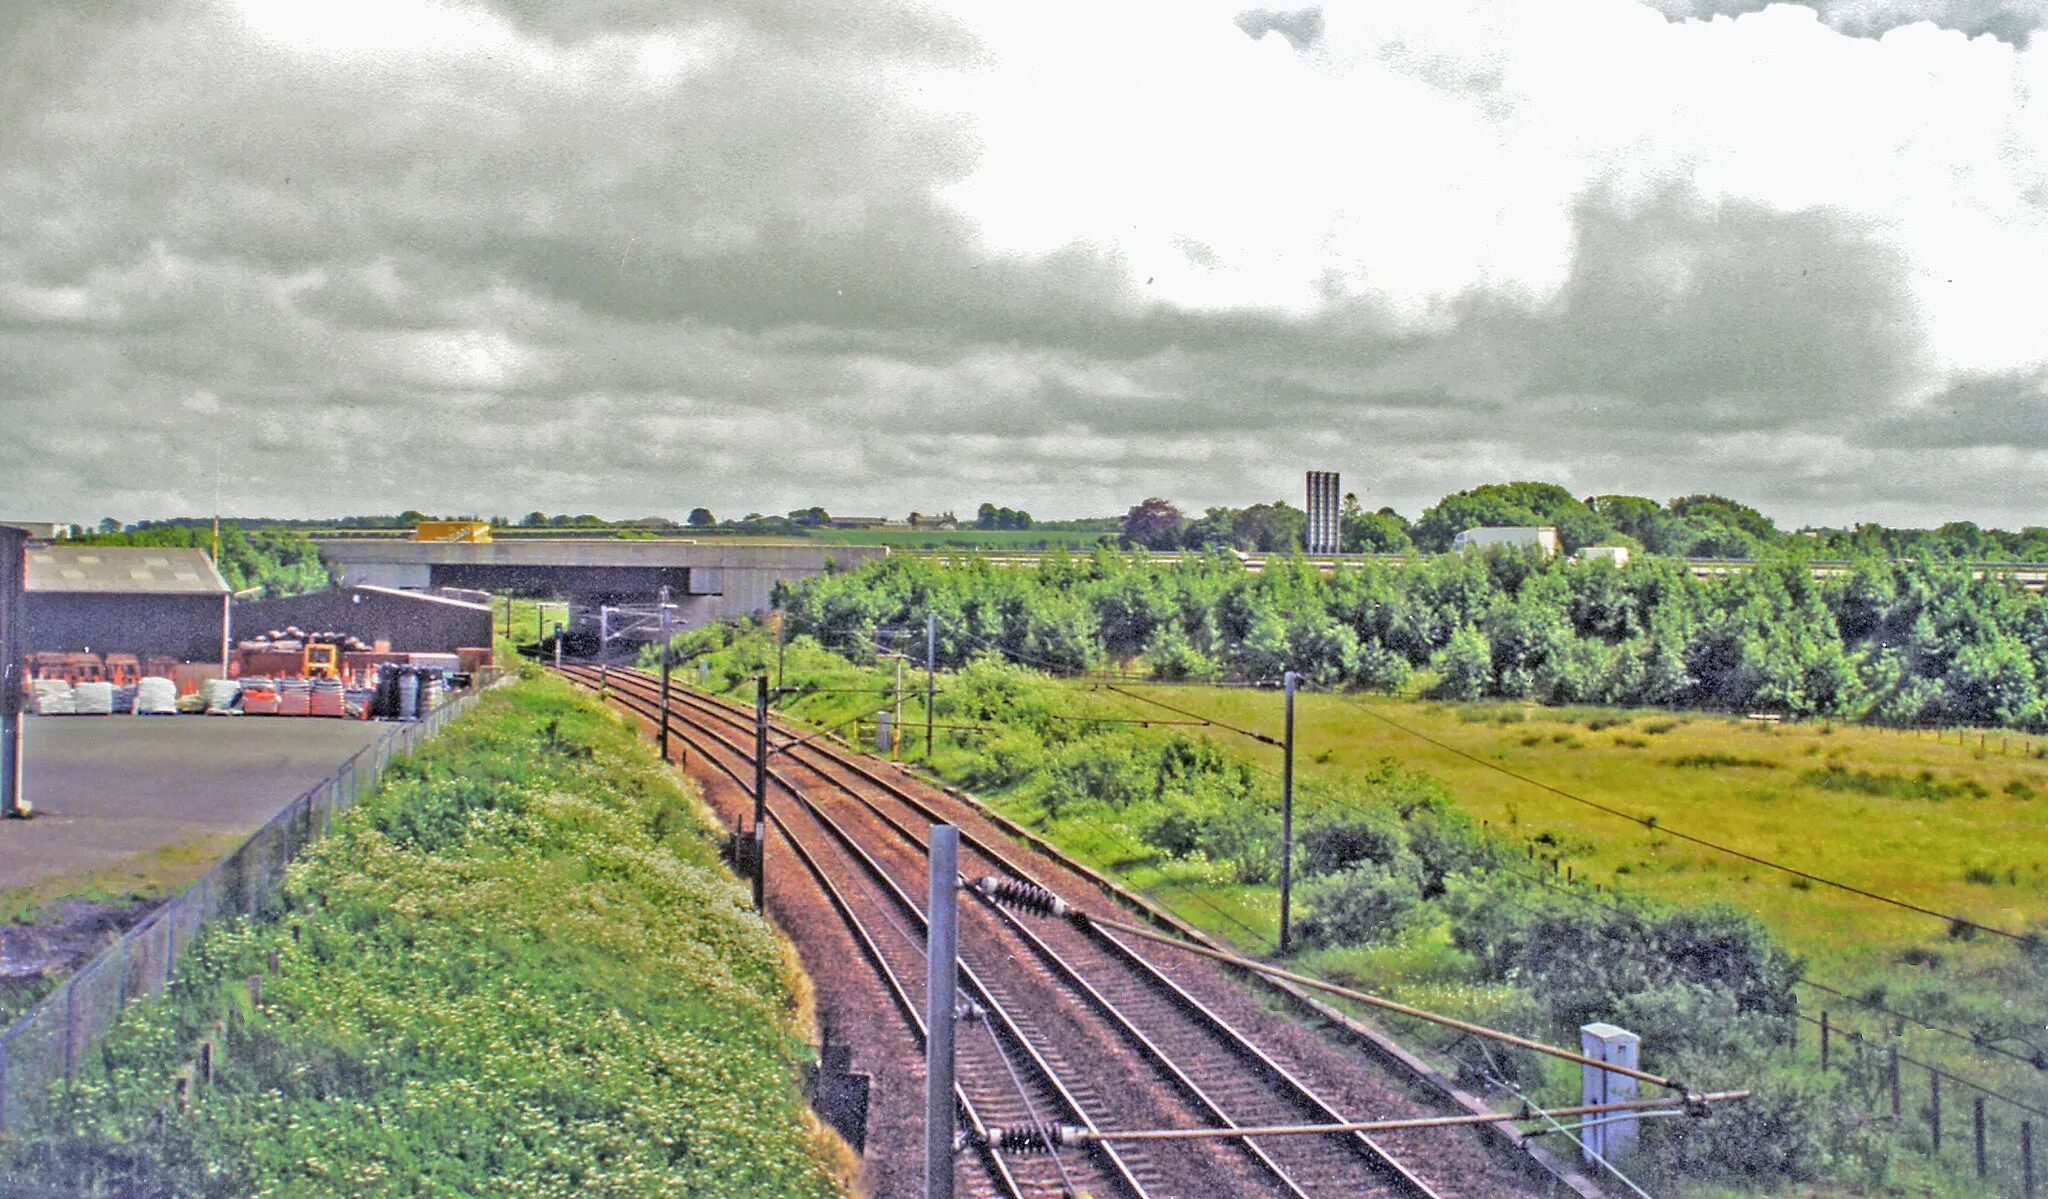 Photo showing: Site of former Kirtlebridge station, WCML 2000.
View southward from B722 to the large bridge of the new A74(M). This is situated where the station had been, until it closed 13/6/60 to passengers (6/4/64 to goods). The view is up the ex-Caledonian Railway (Glasgow - Carlisle) section of the West Coast Main Line, electrified 1974. Off to the right used to be the branch line to Annan (Shawhill) and over the Solway Viaduct to Brayton on the Maryport & Carlisle Railway; this lasted to Brayton only until 20/5/21, to Annan for passengers until 27/4/31 (goods 28/2/55, however).